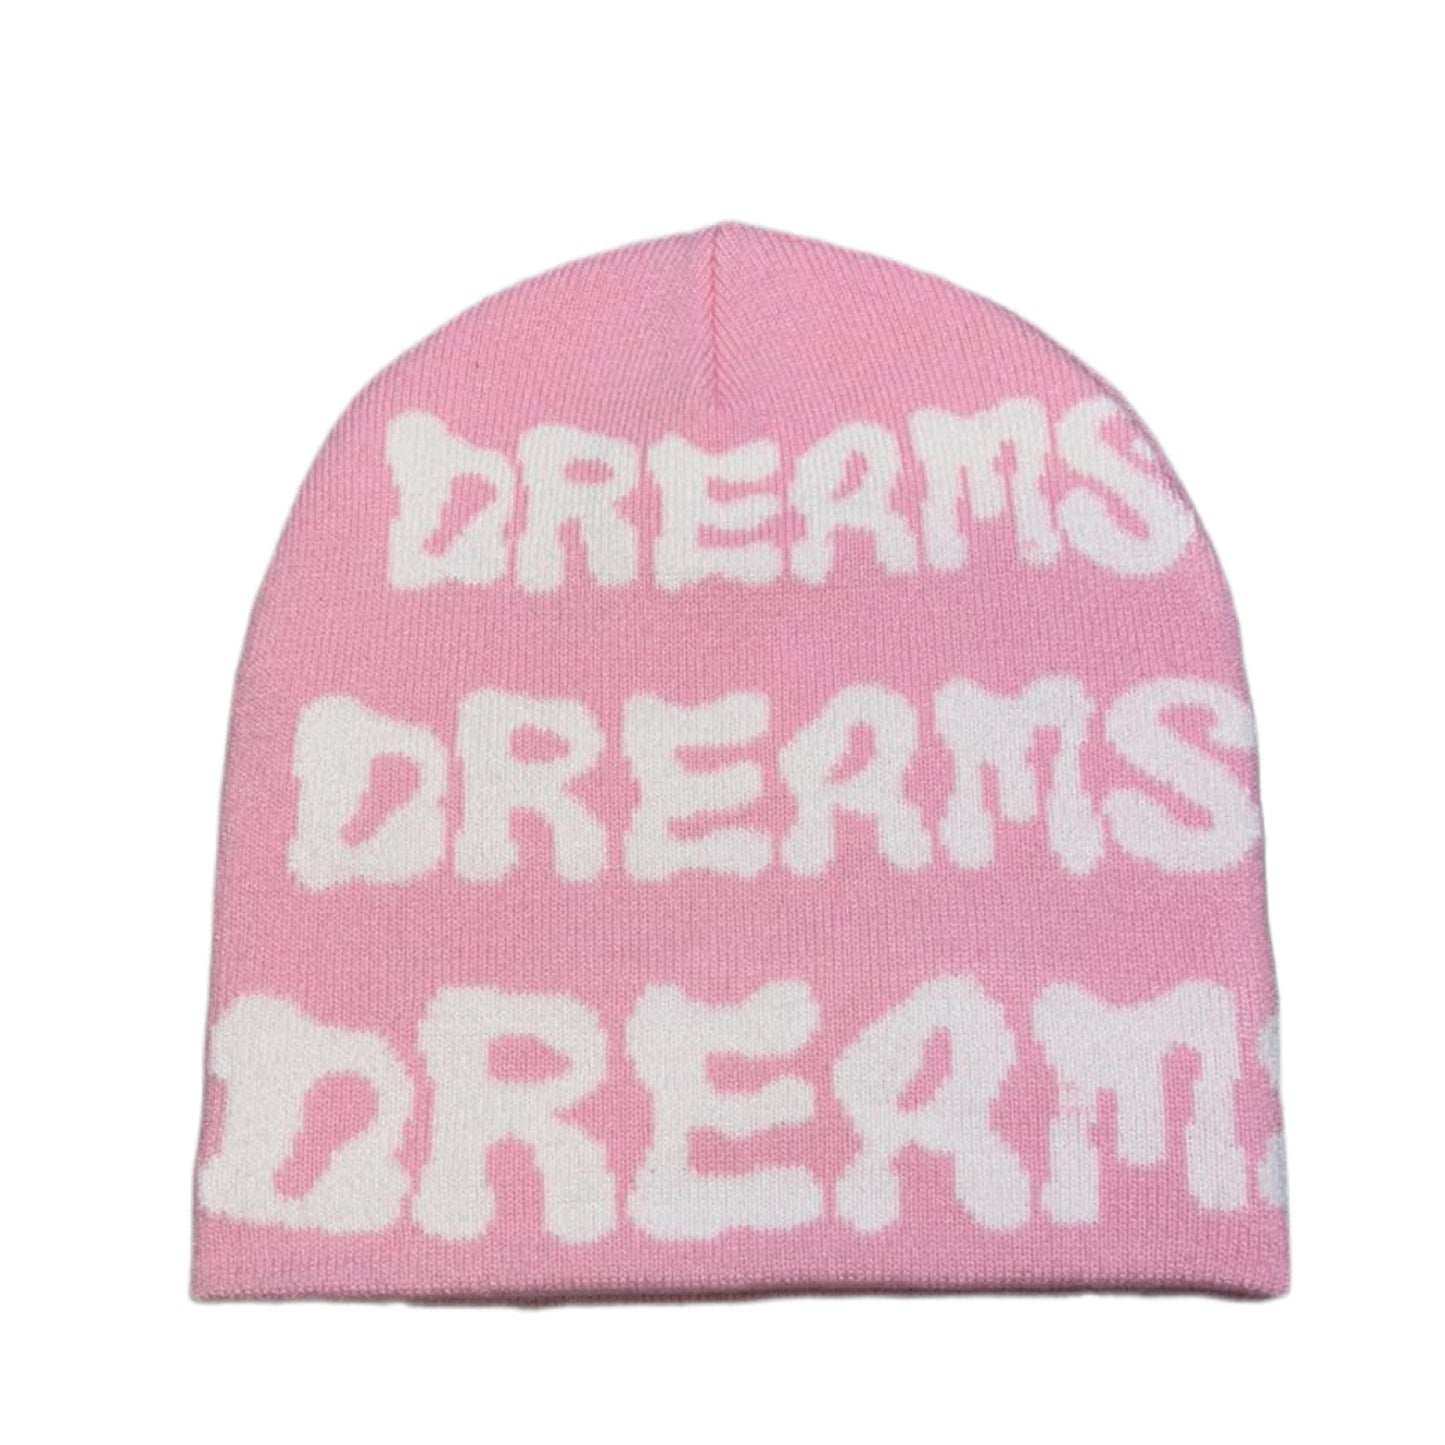 Silent Dreams Pink Beanie Sweet Scare